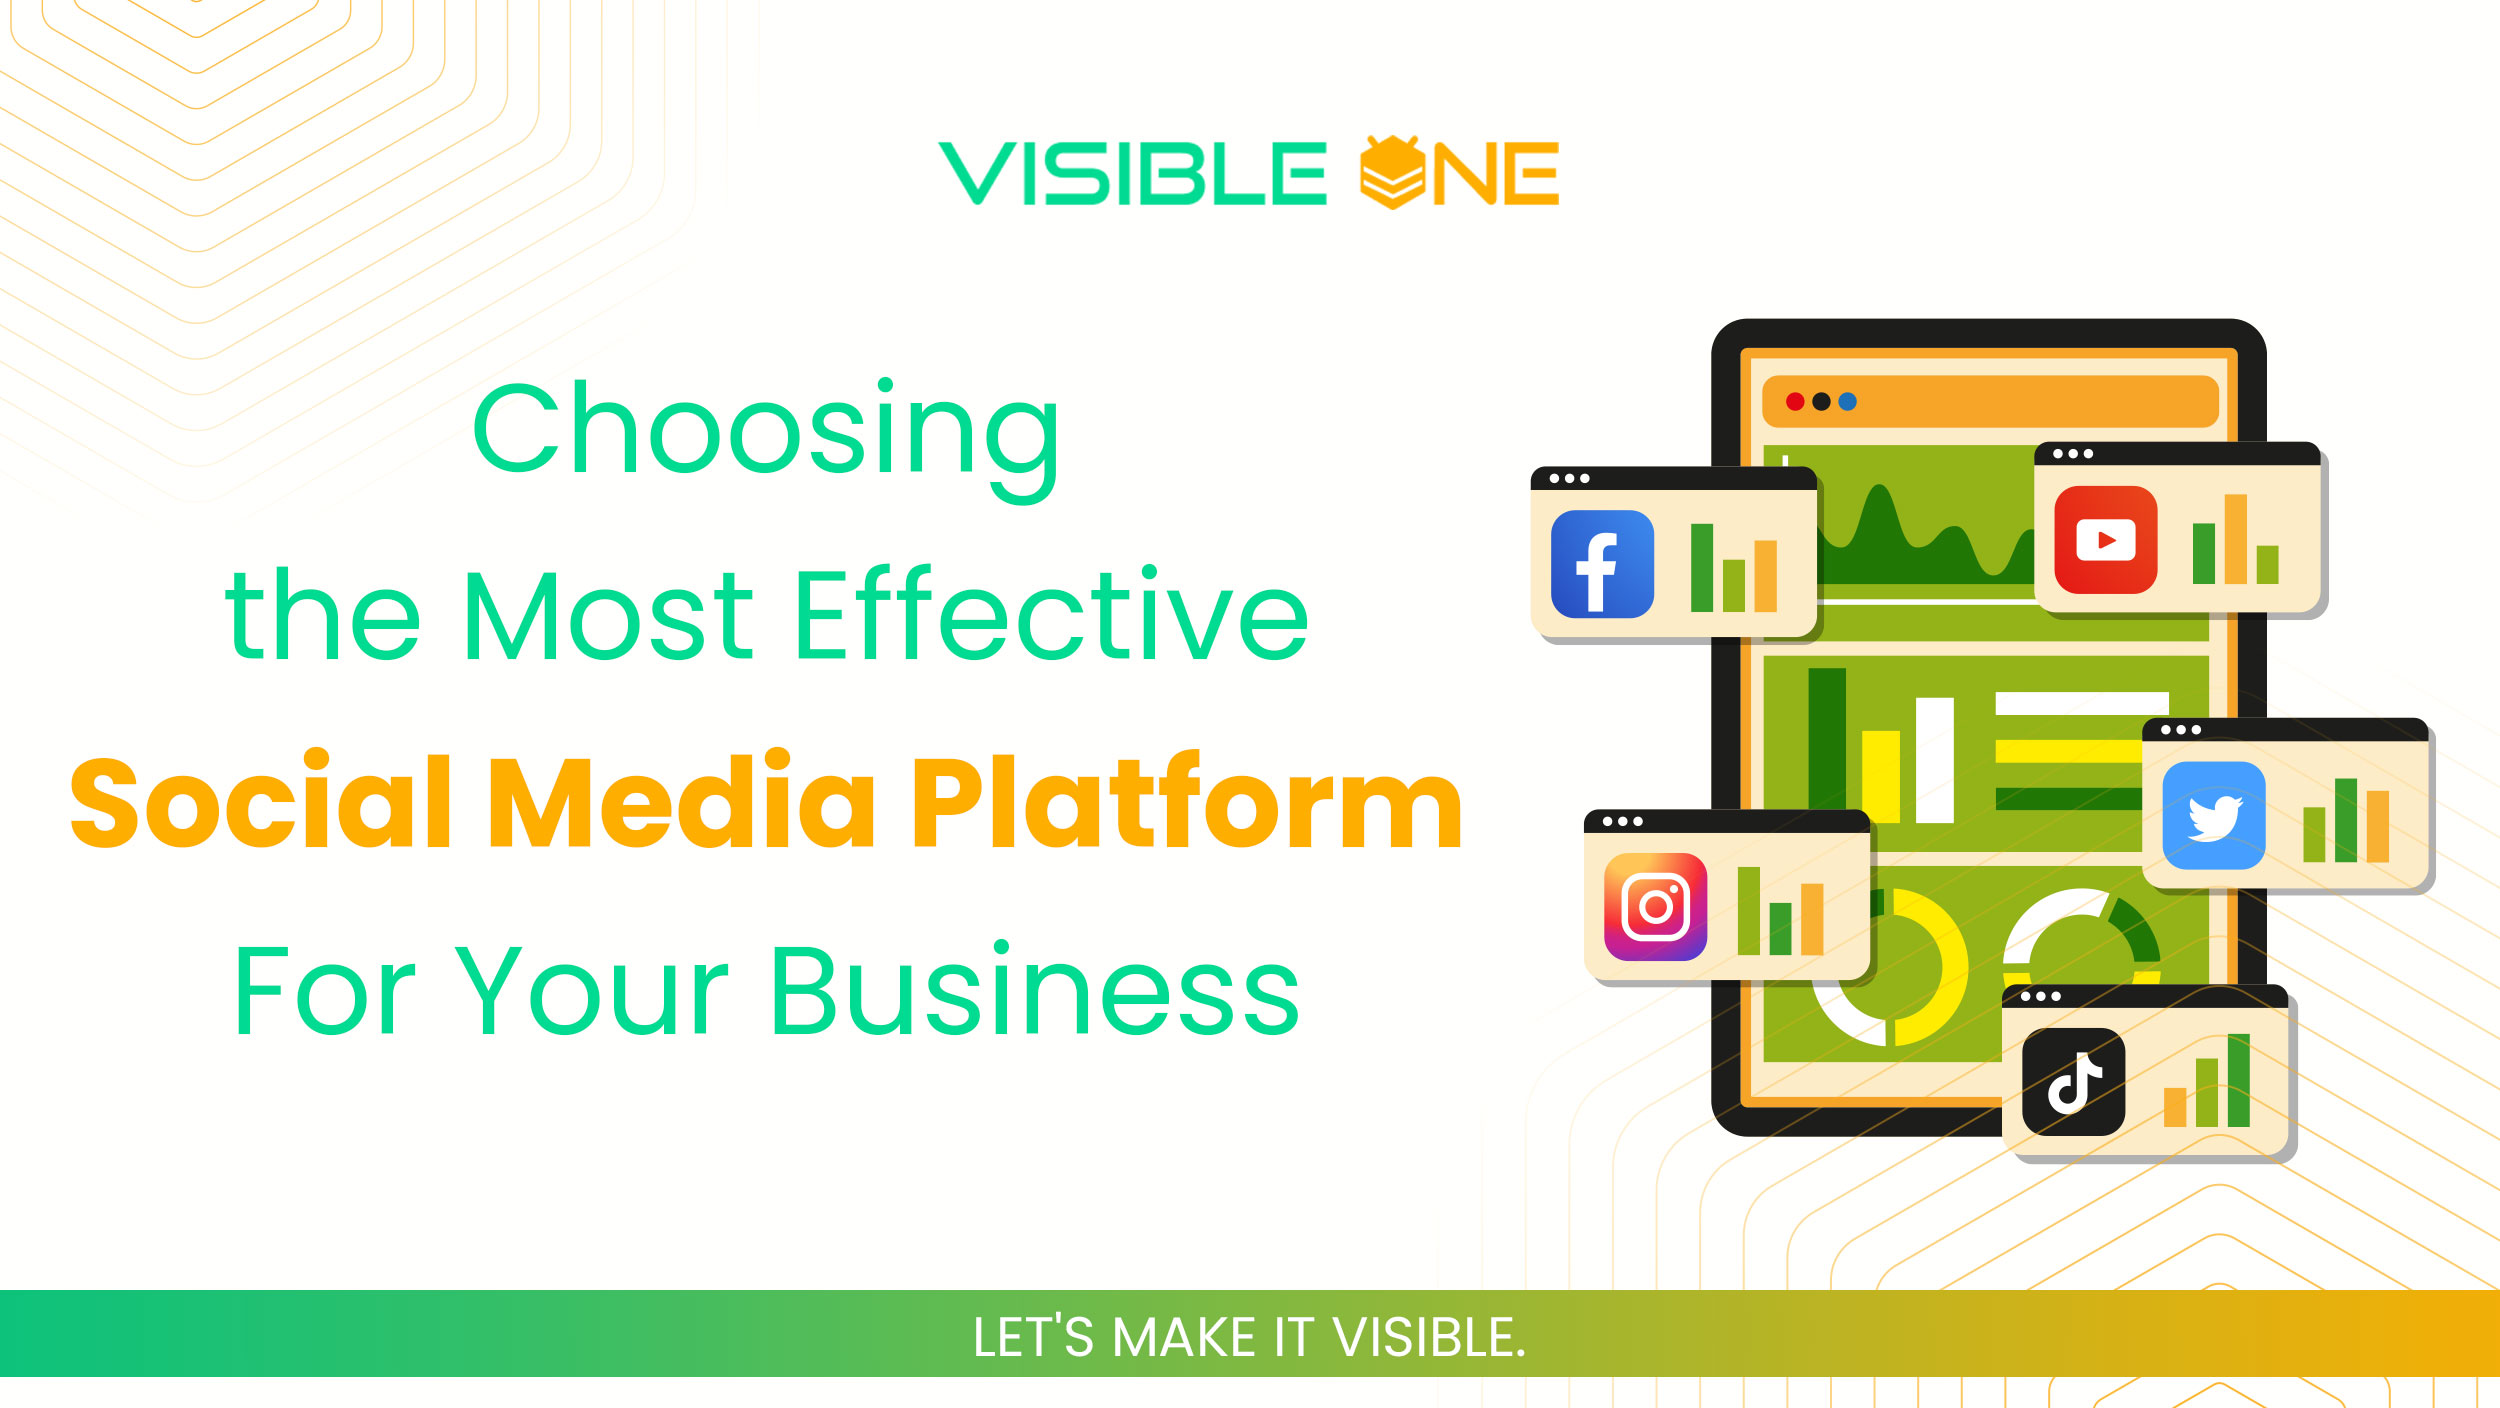 Choosing the Most Effective Social Media Platform For Your Business